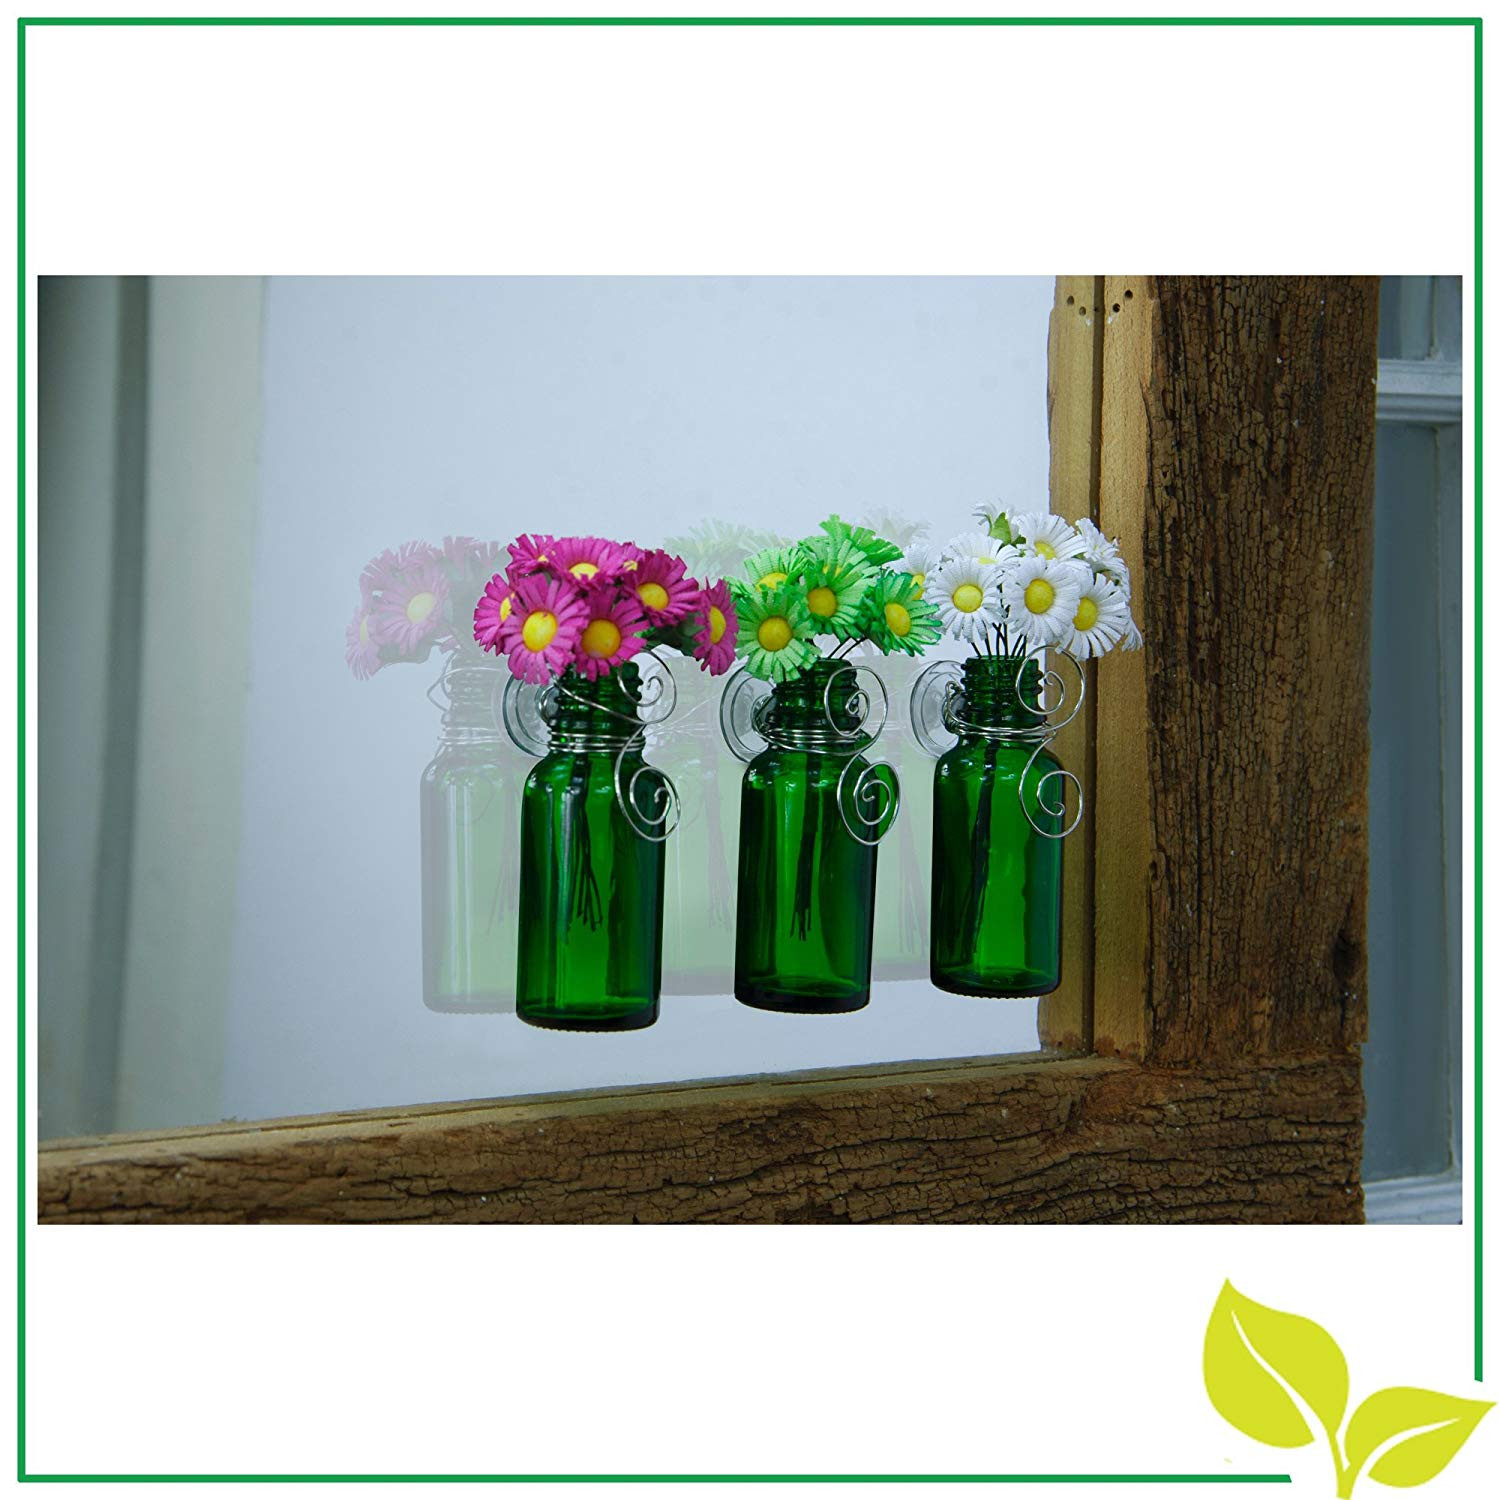 hand blown glass bud vase of amazon com vazzini mini vase bouquet suction cup bud bottle intended for amazon com vazzini mini vase bouquet suction cup bud bottle holder with flowers decorative for window mirrors tile wedding party favor get well